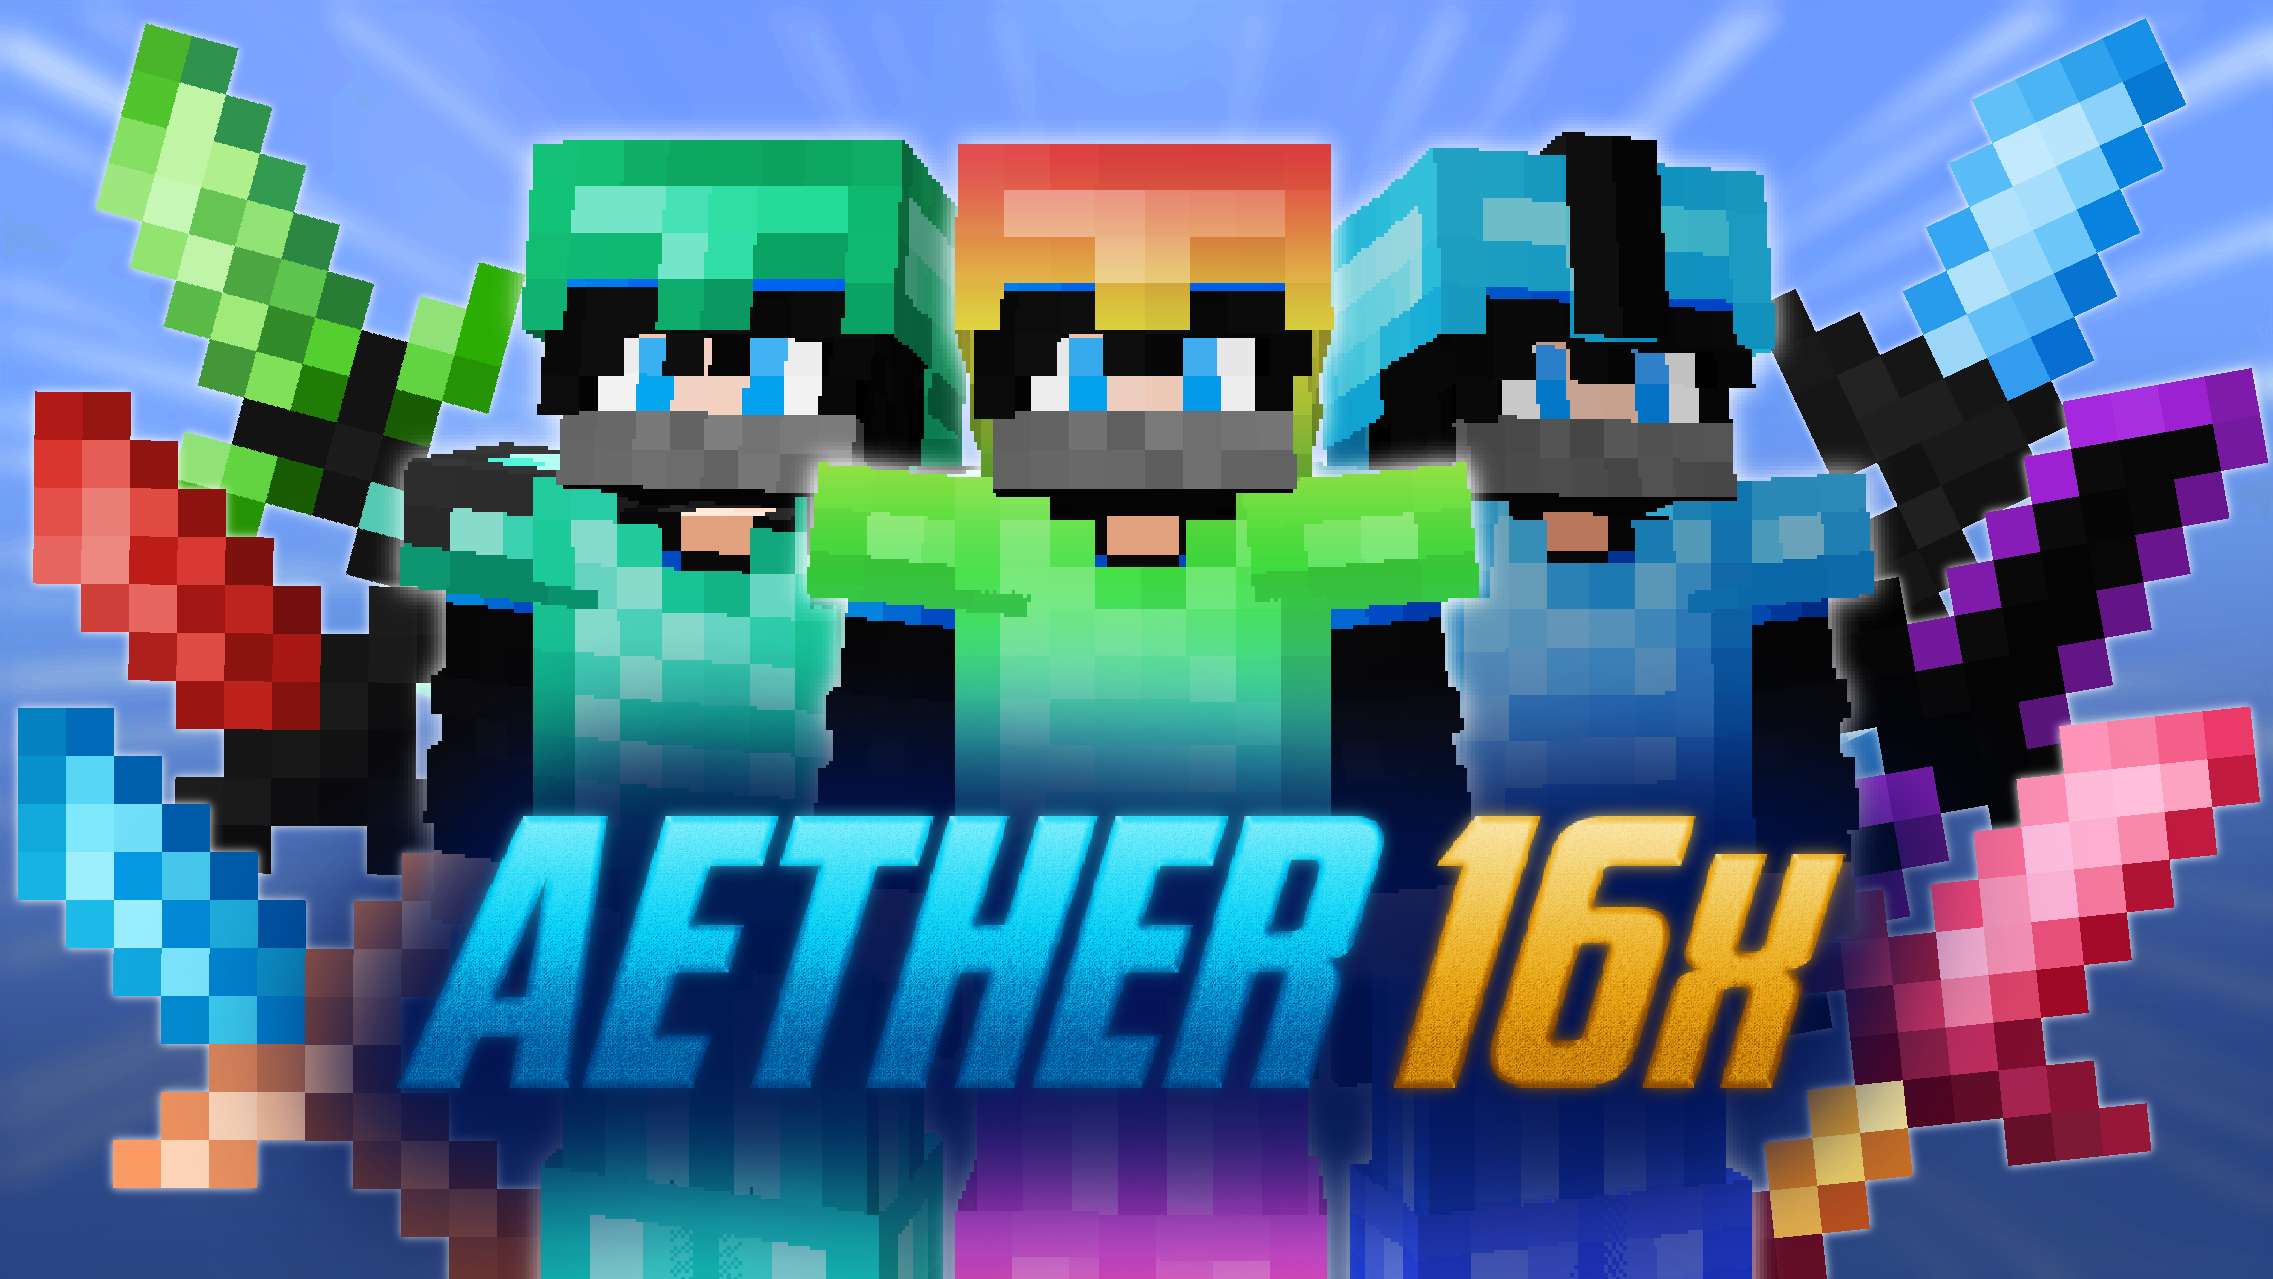 Aether  [BenBGamer] 16x by Mqryo on PvPRP